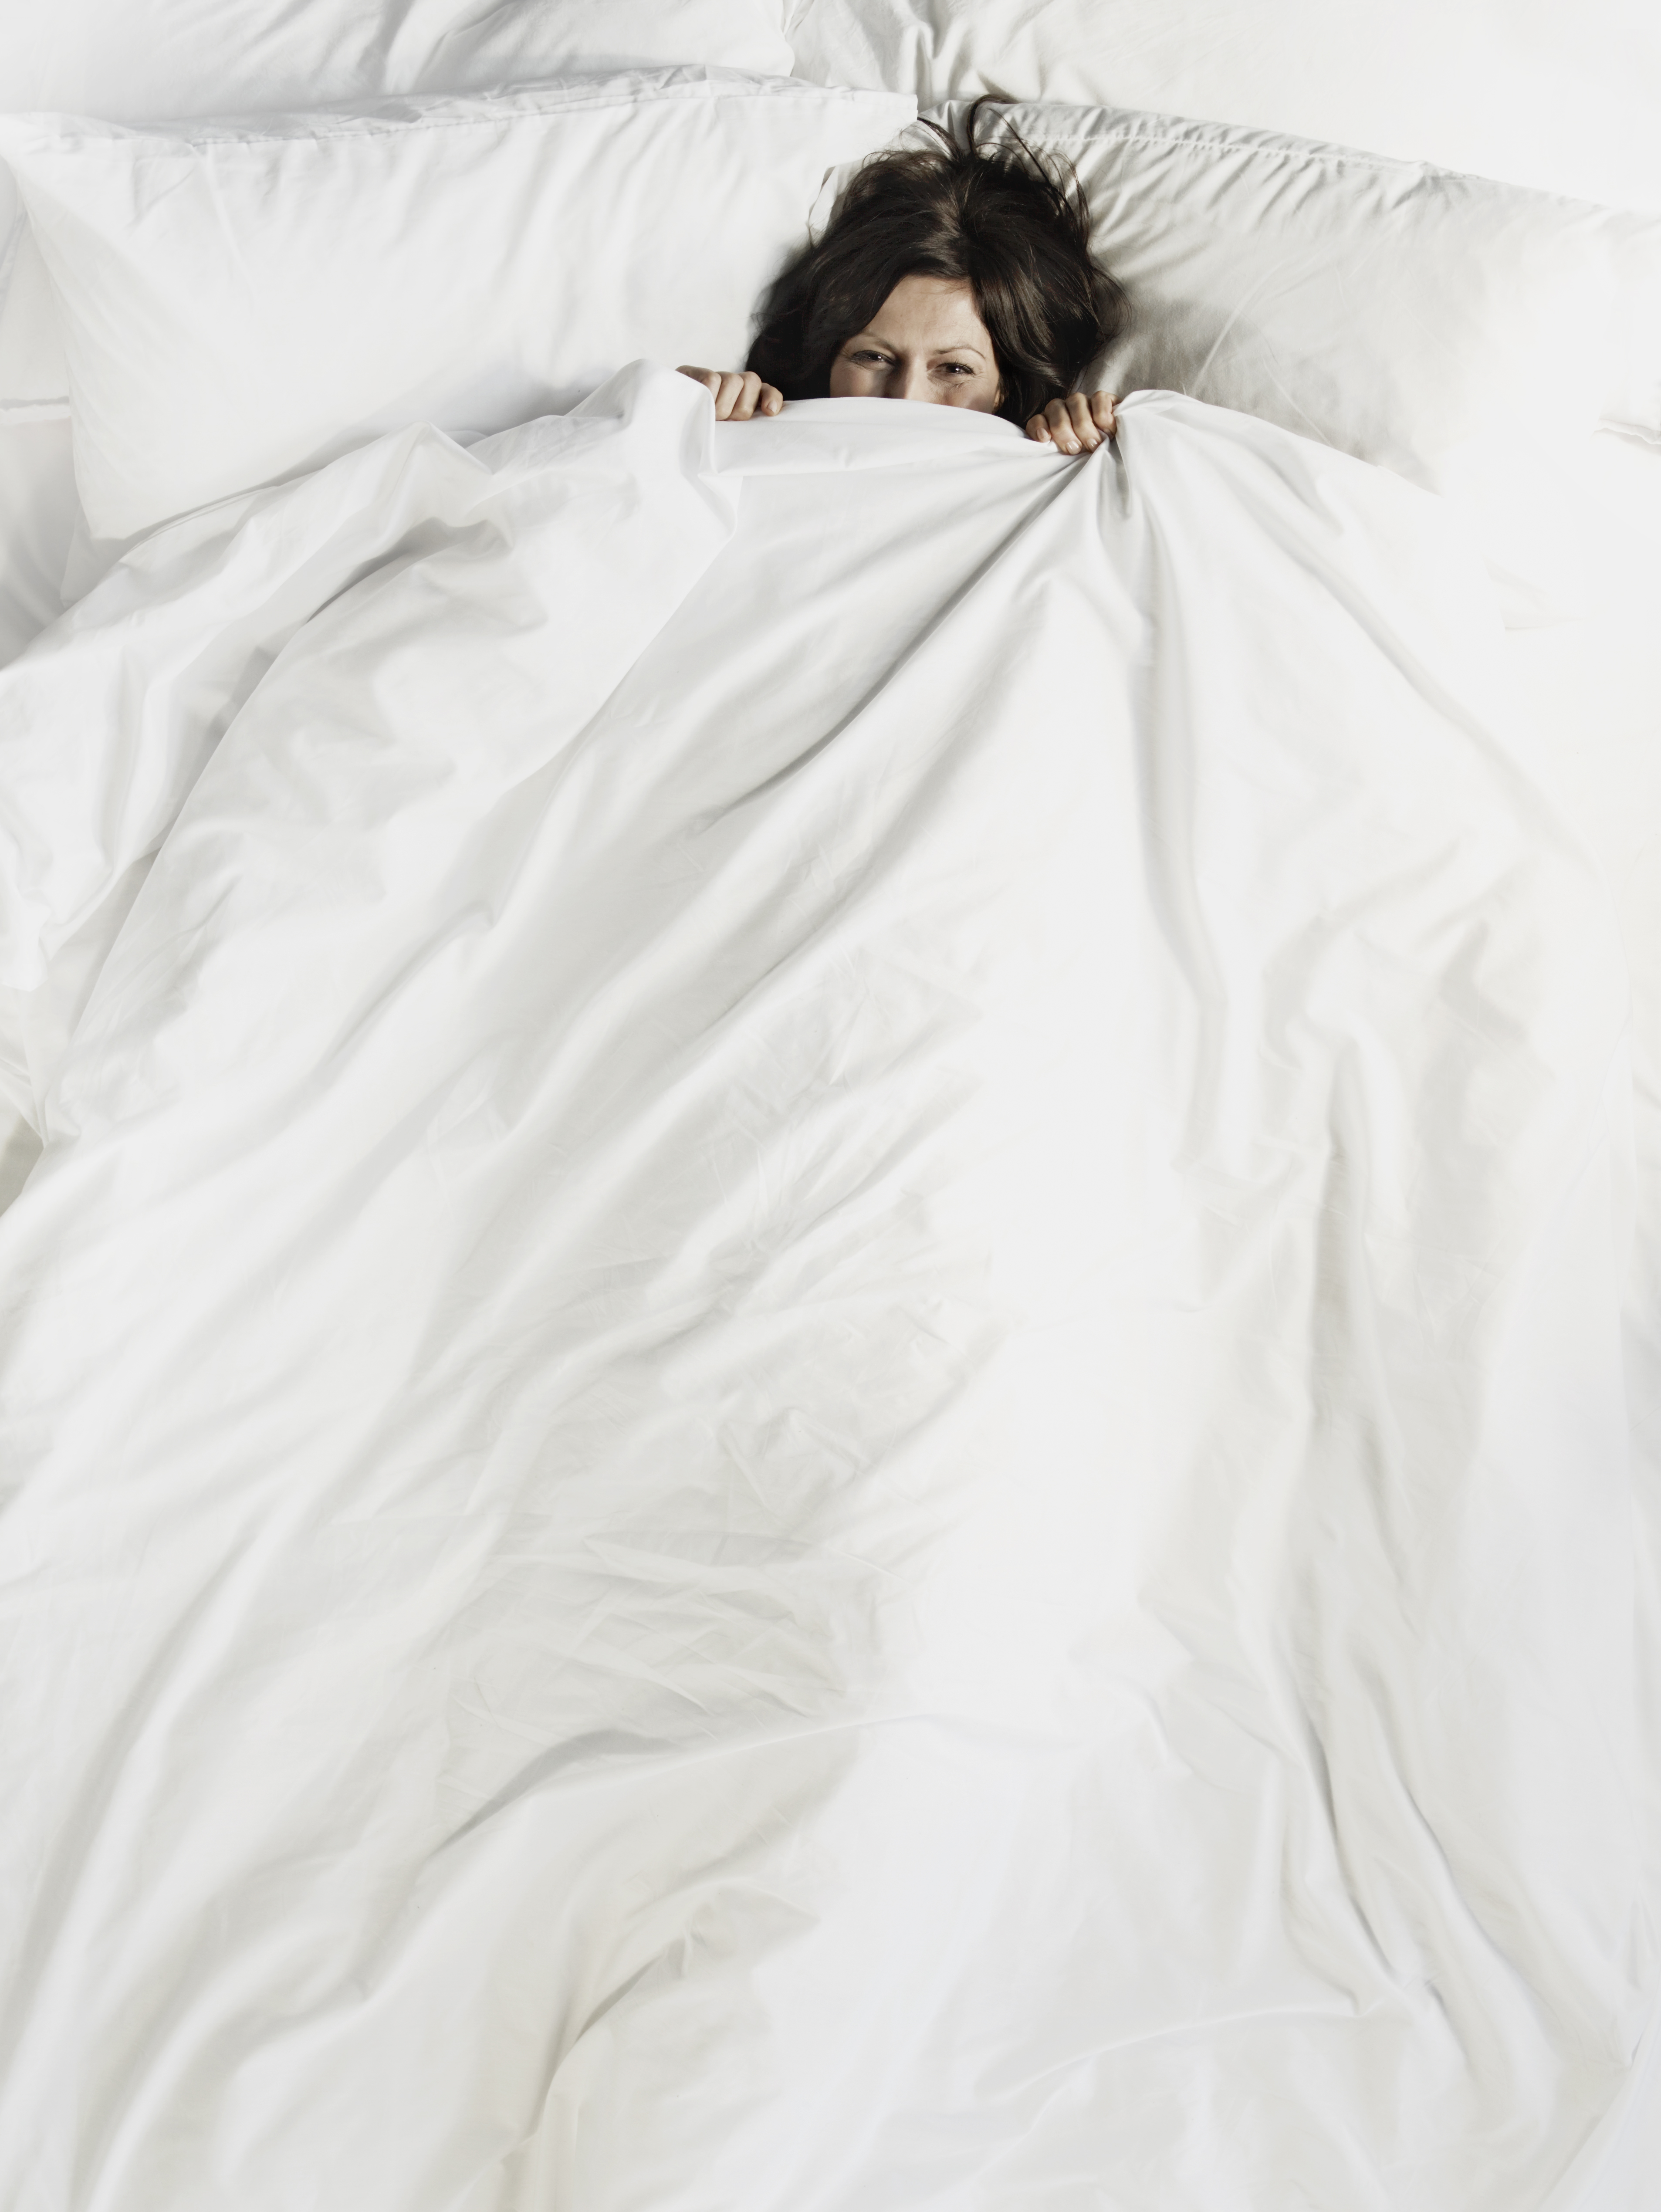 Woman peering over the top of bed sheet